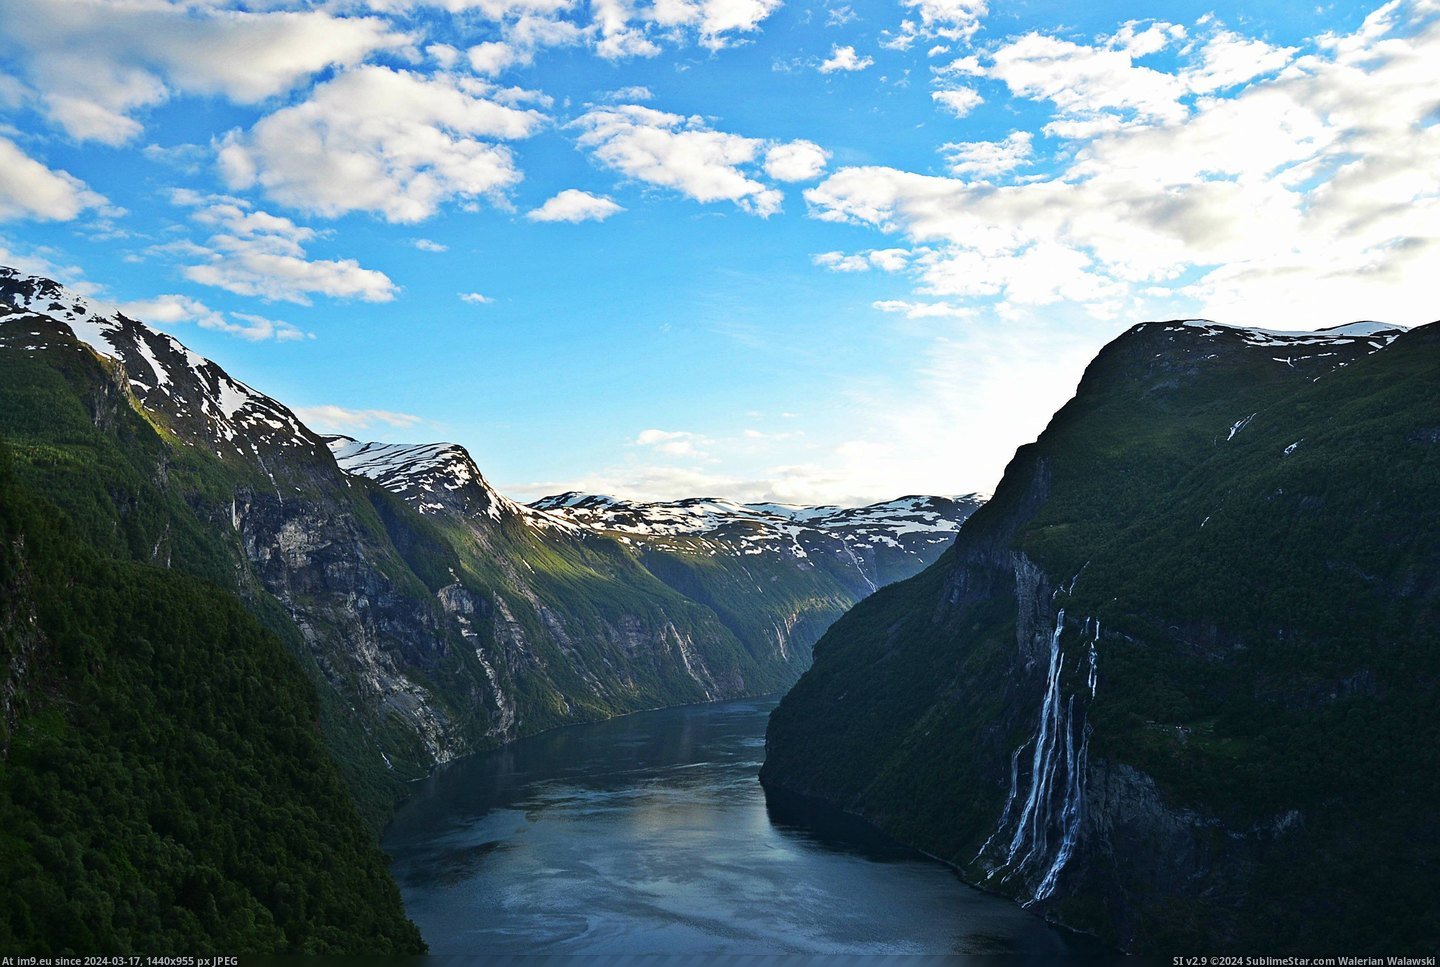 #Work #Norway #Geirangerfjord #Hike #3456x2304 [Earthporn] Took this on my after-work hike in Geirangerfjord, Norway. [3456x2304] [OC] Pic. (Image of album My r/EARTHPORN favs))